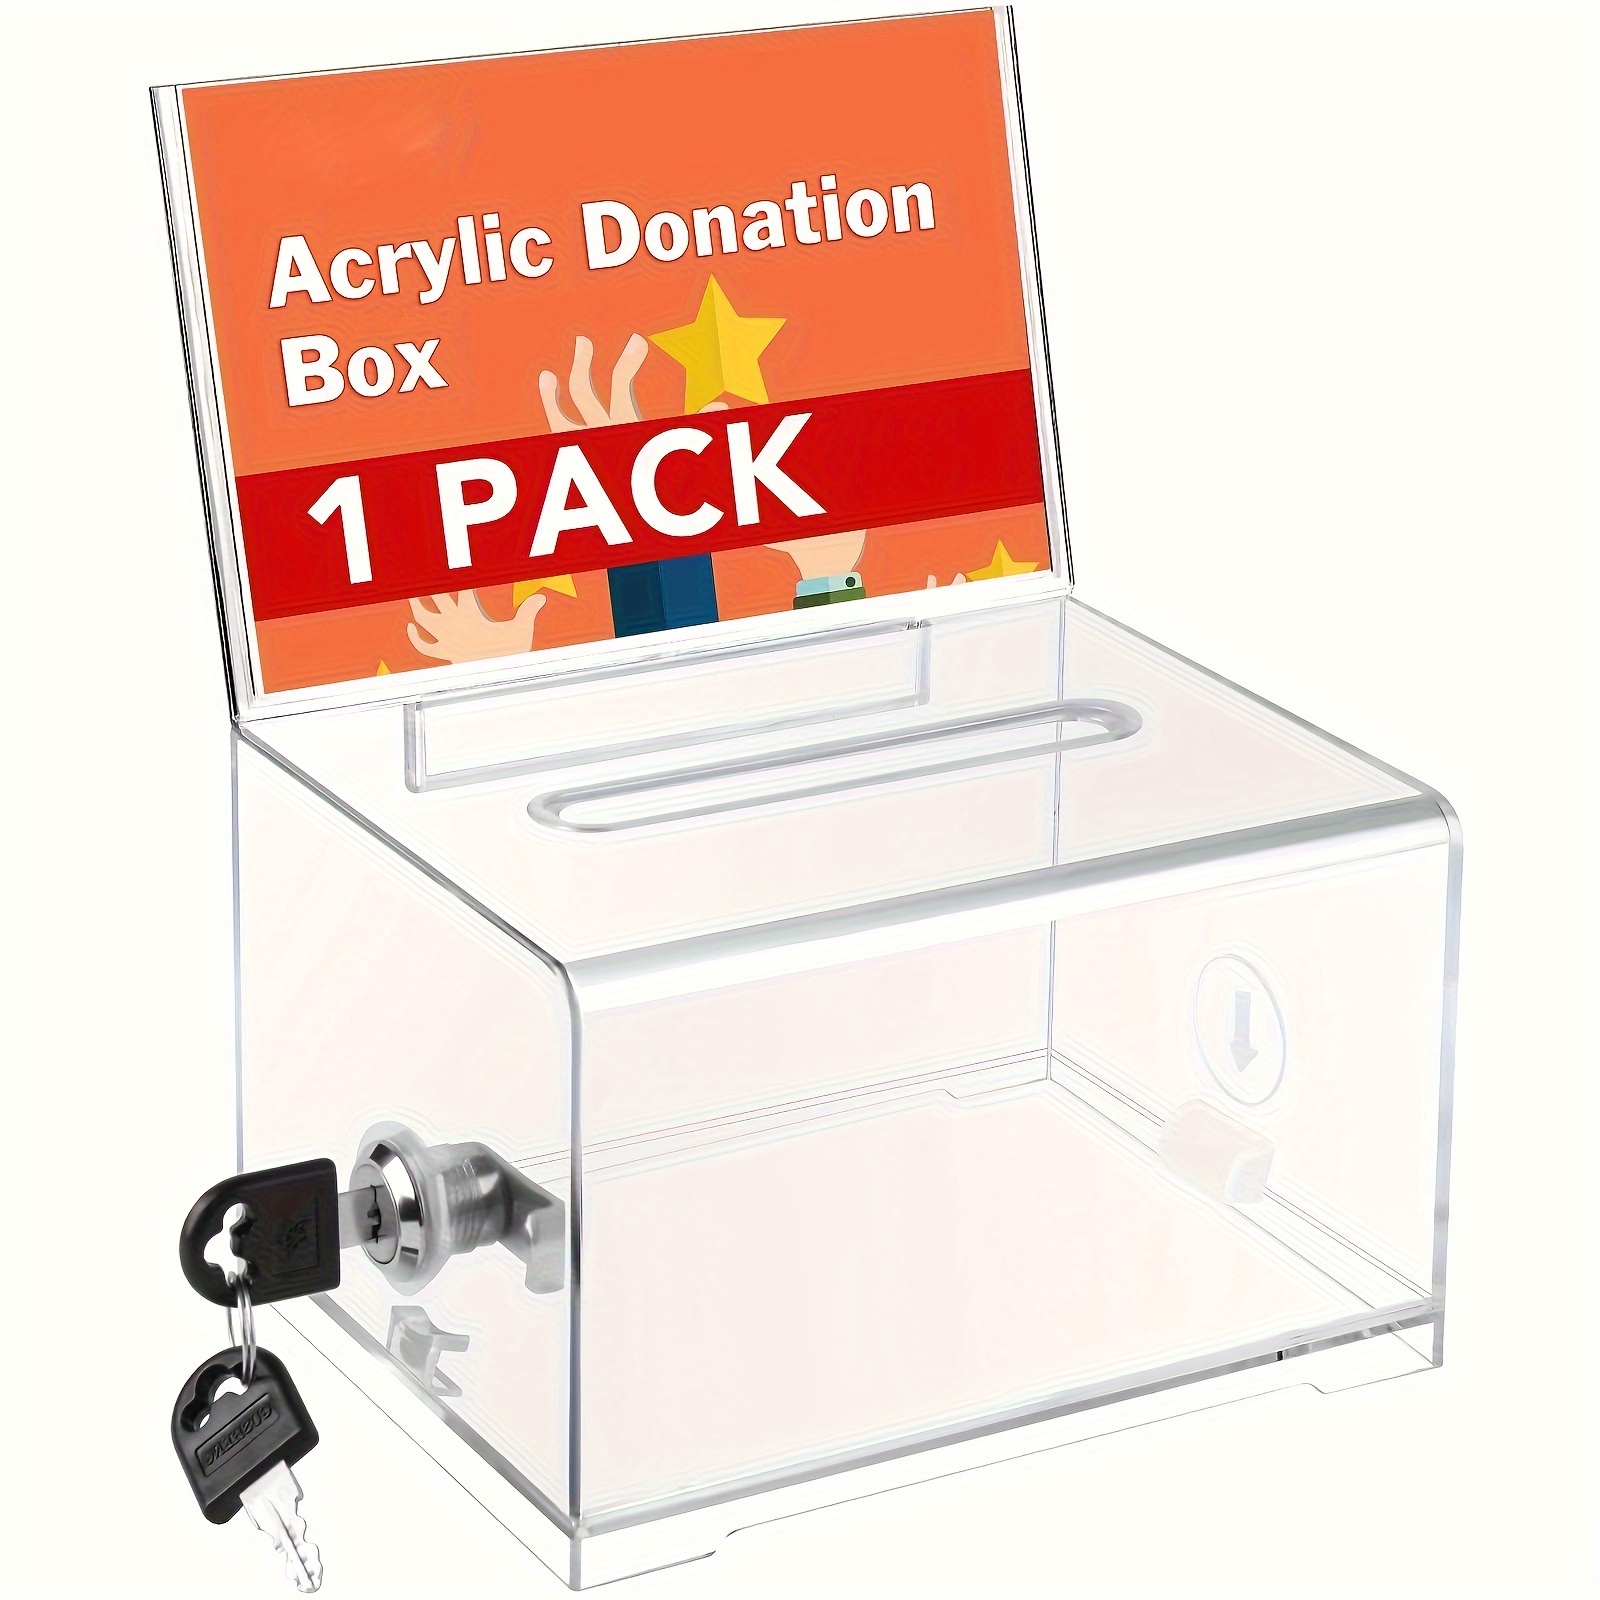 

1pc Acrylic Donation Box With Lock, Transparent Voting Box With Logo Holder, Letter Collection Box, Special Deposit Box, Fundraising, Donation, Bar, School Voting Suggestion Box, 6.2x4.6x3.9 In